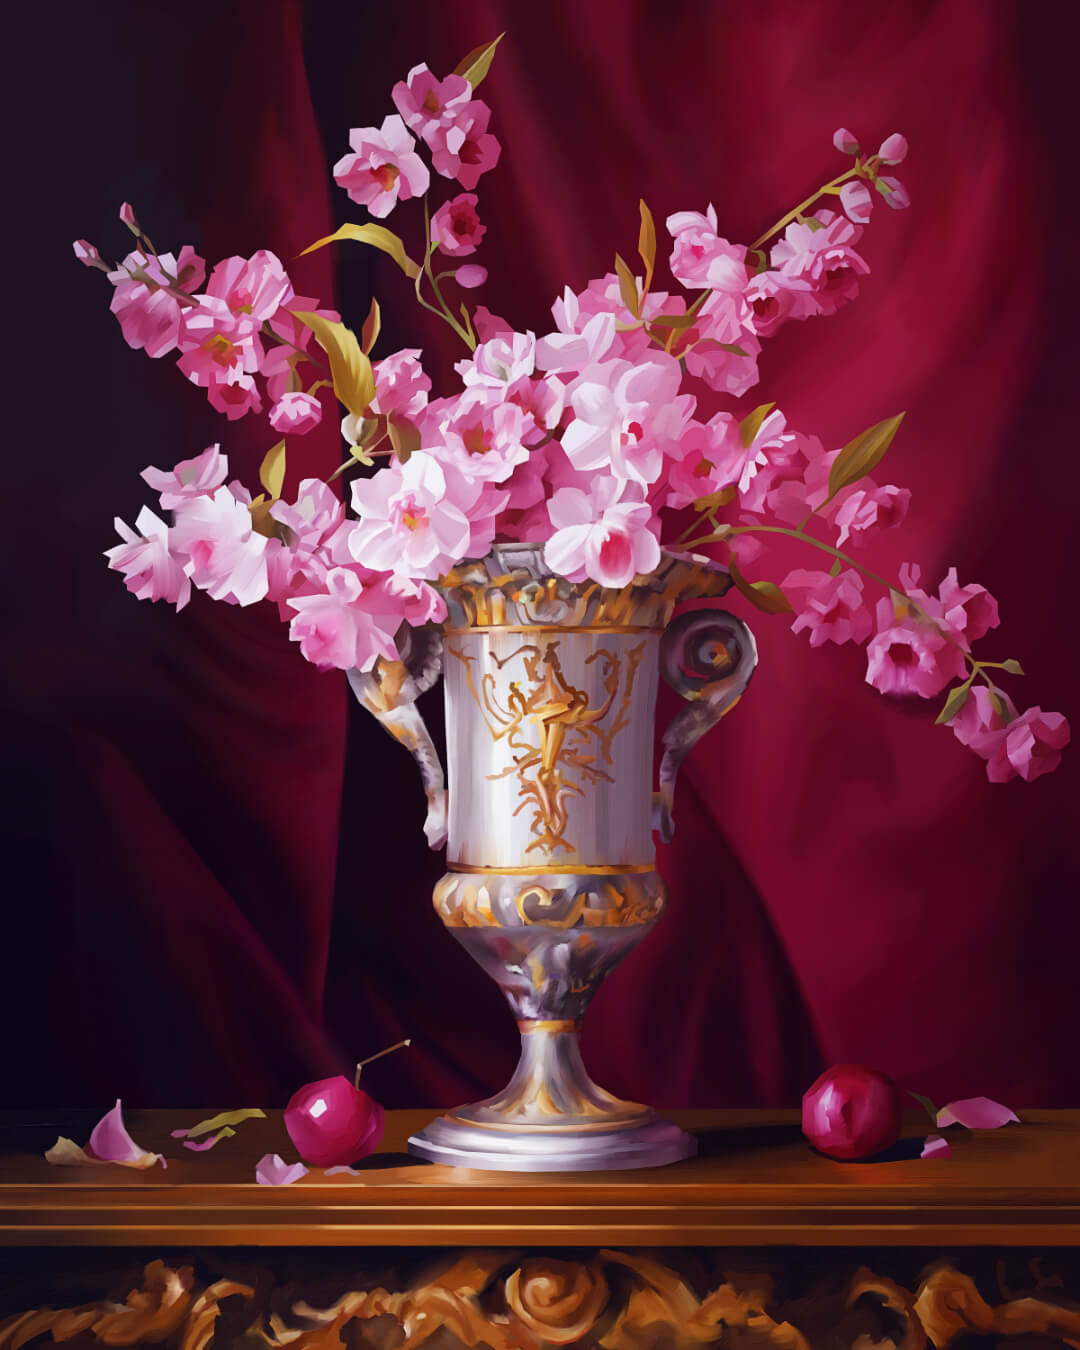 In this painting, a silver vase holds delicate cherry blossoms, with a vibrant red curtain serving as a striking backdrop.